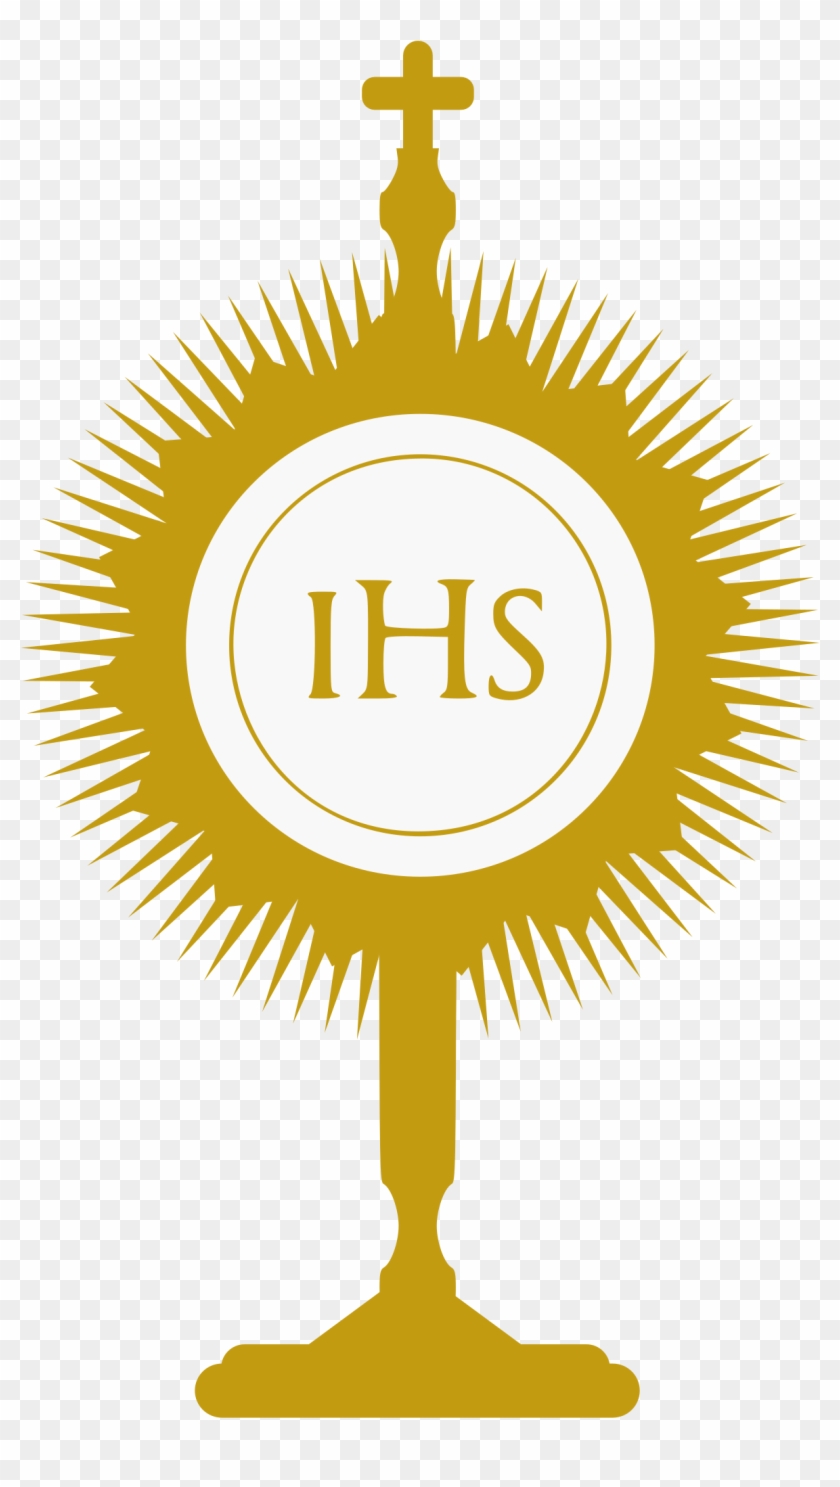 Eucharist Clipart Eucharist Ihs Clip Art At Clker Vector - Blessed Sacrament Icon #598078